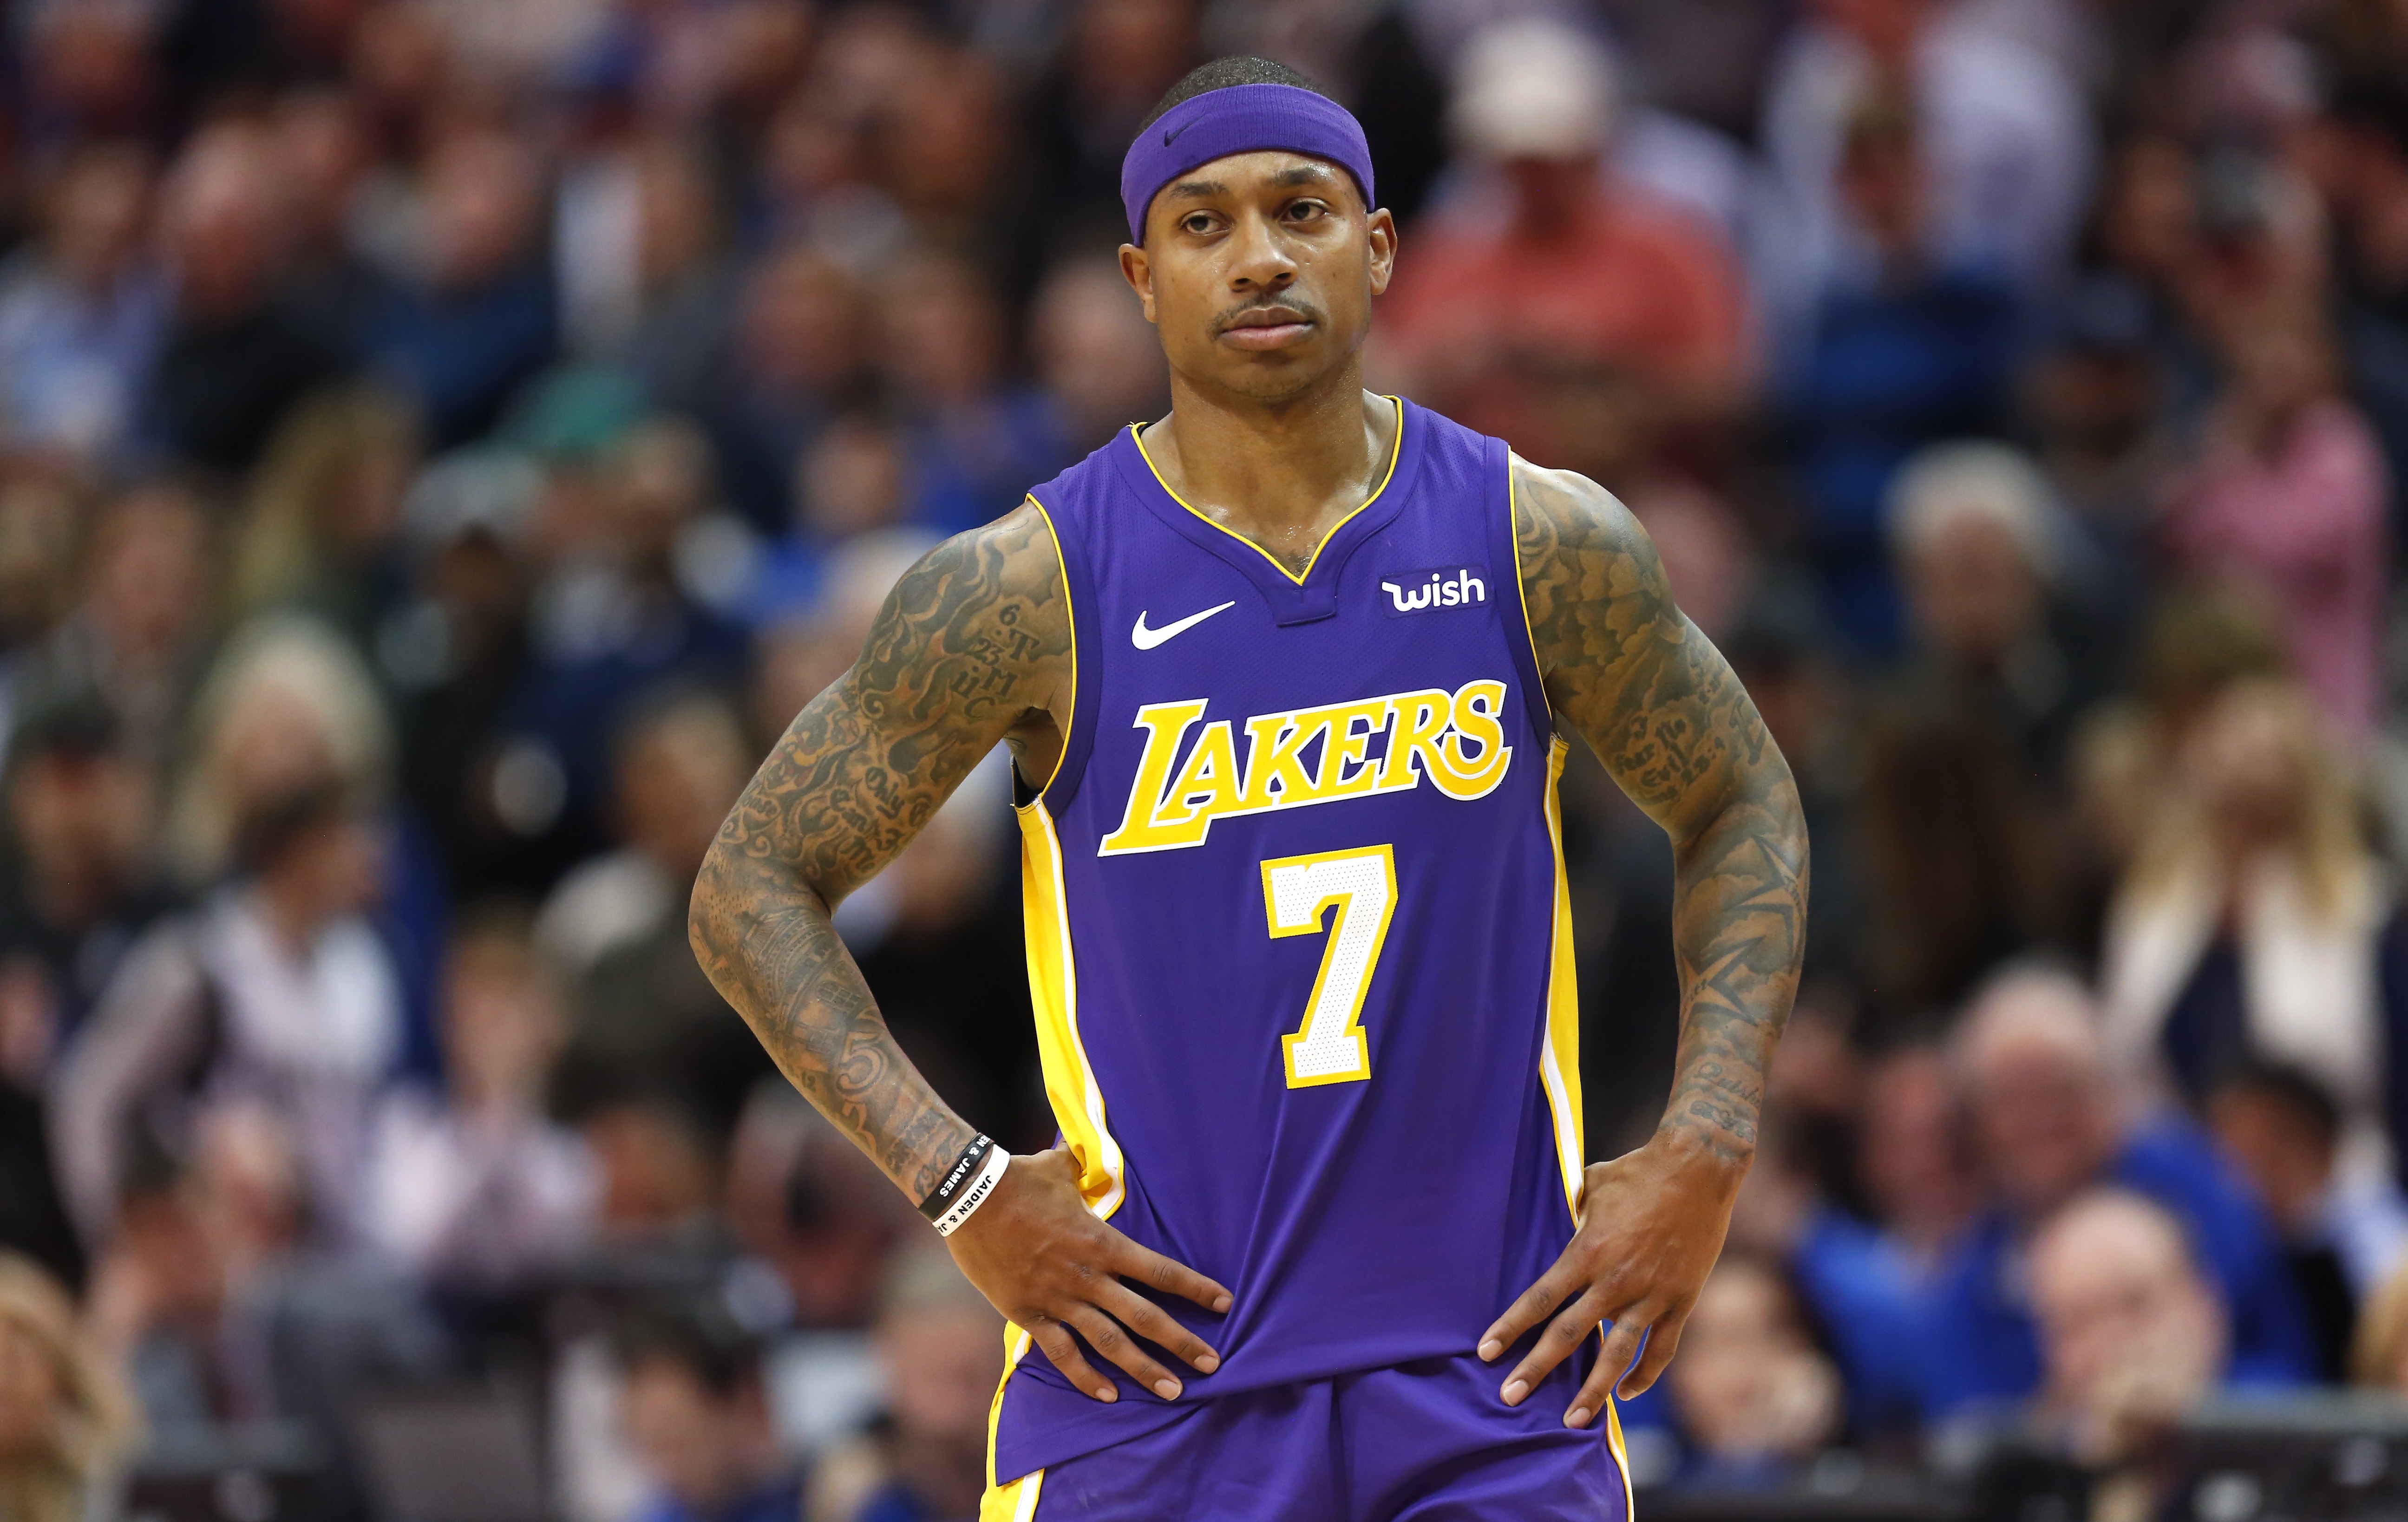 Los Angeles Lakers must choose offense or defense with Isaiah Thomas